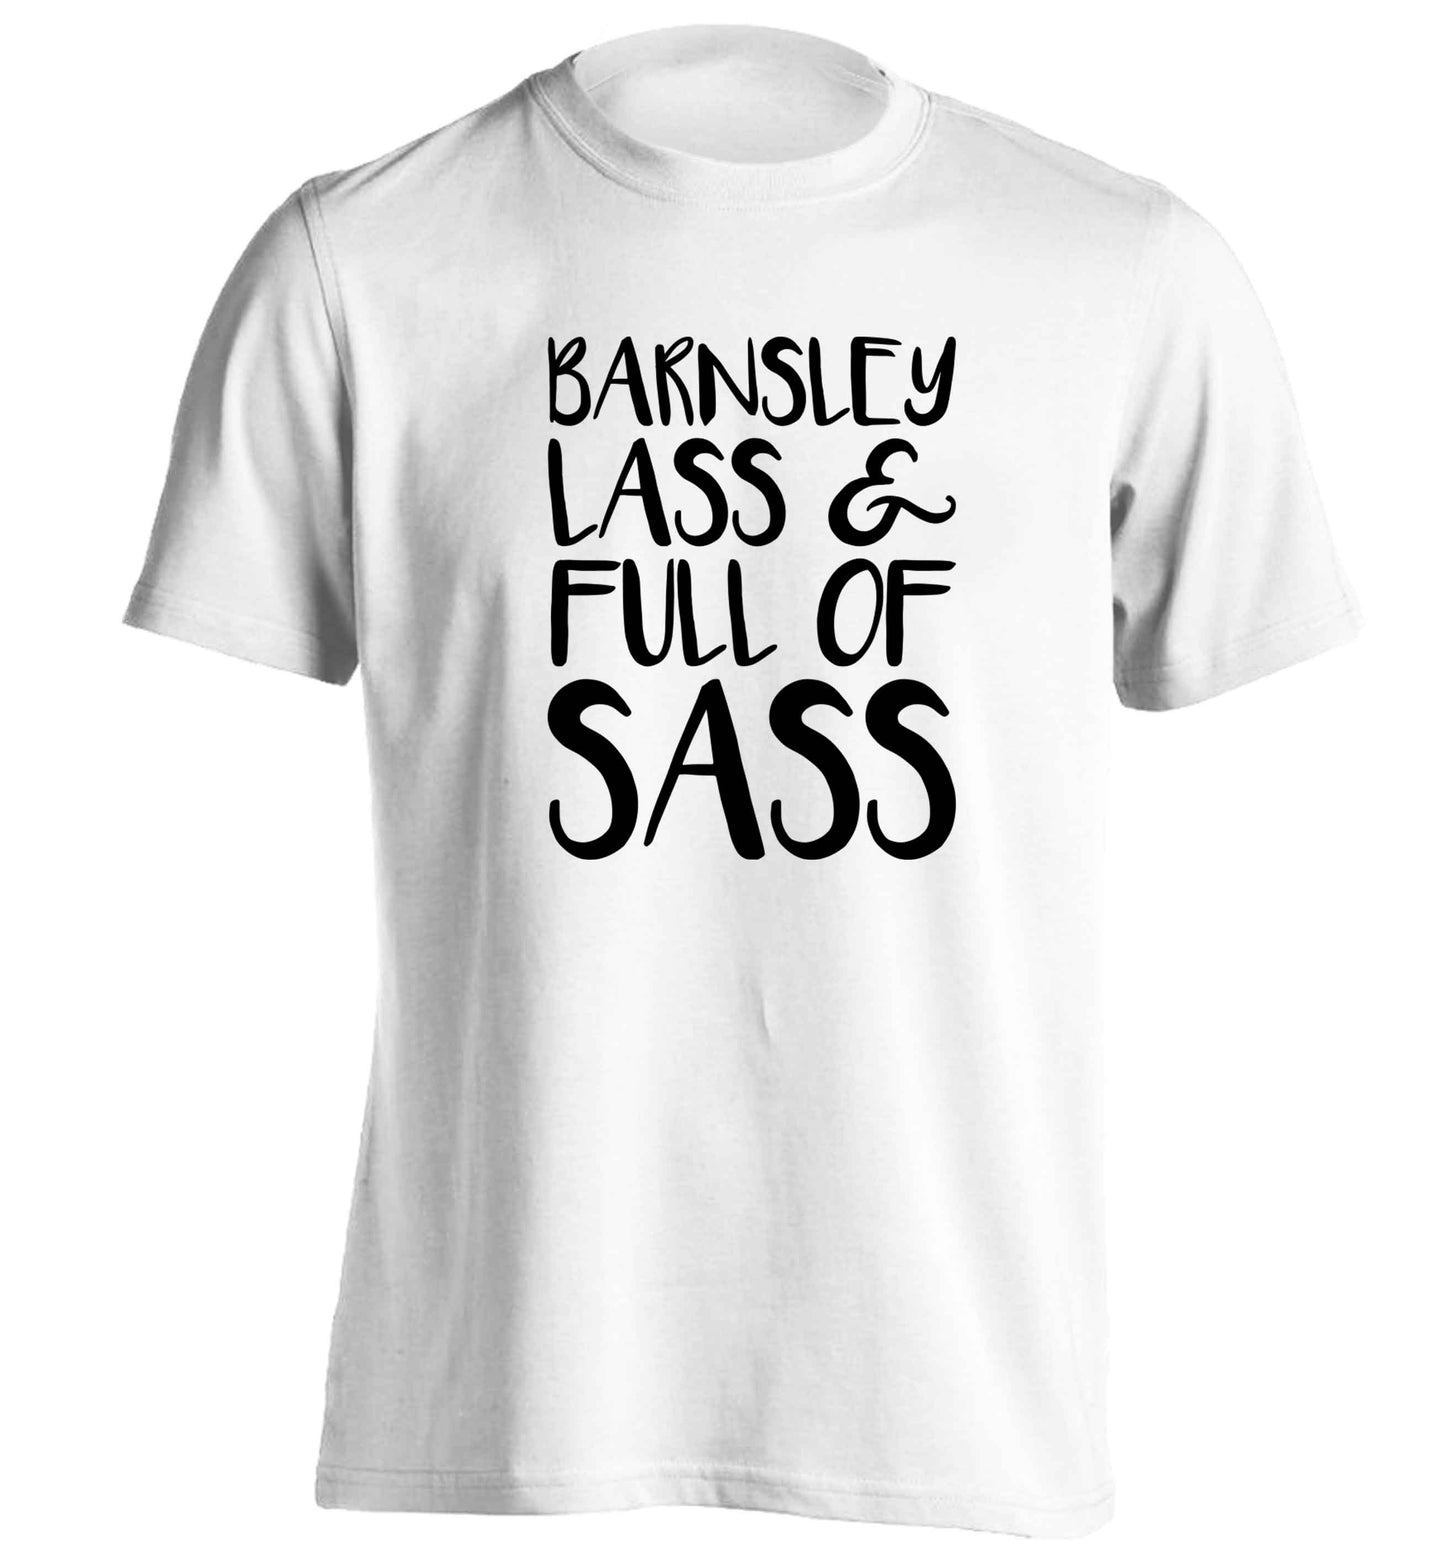 Barnsley lass and full of sass adults unisex white Tshirt 2XL